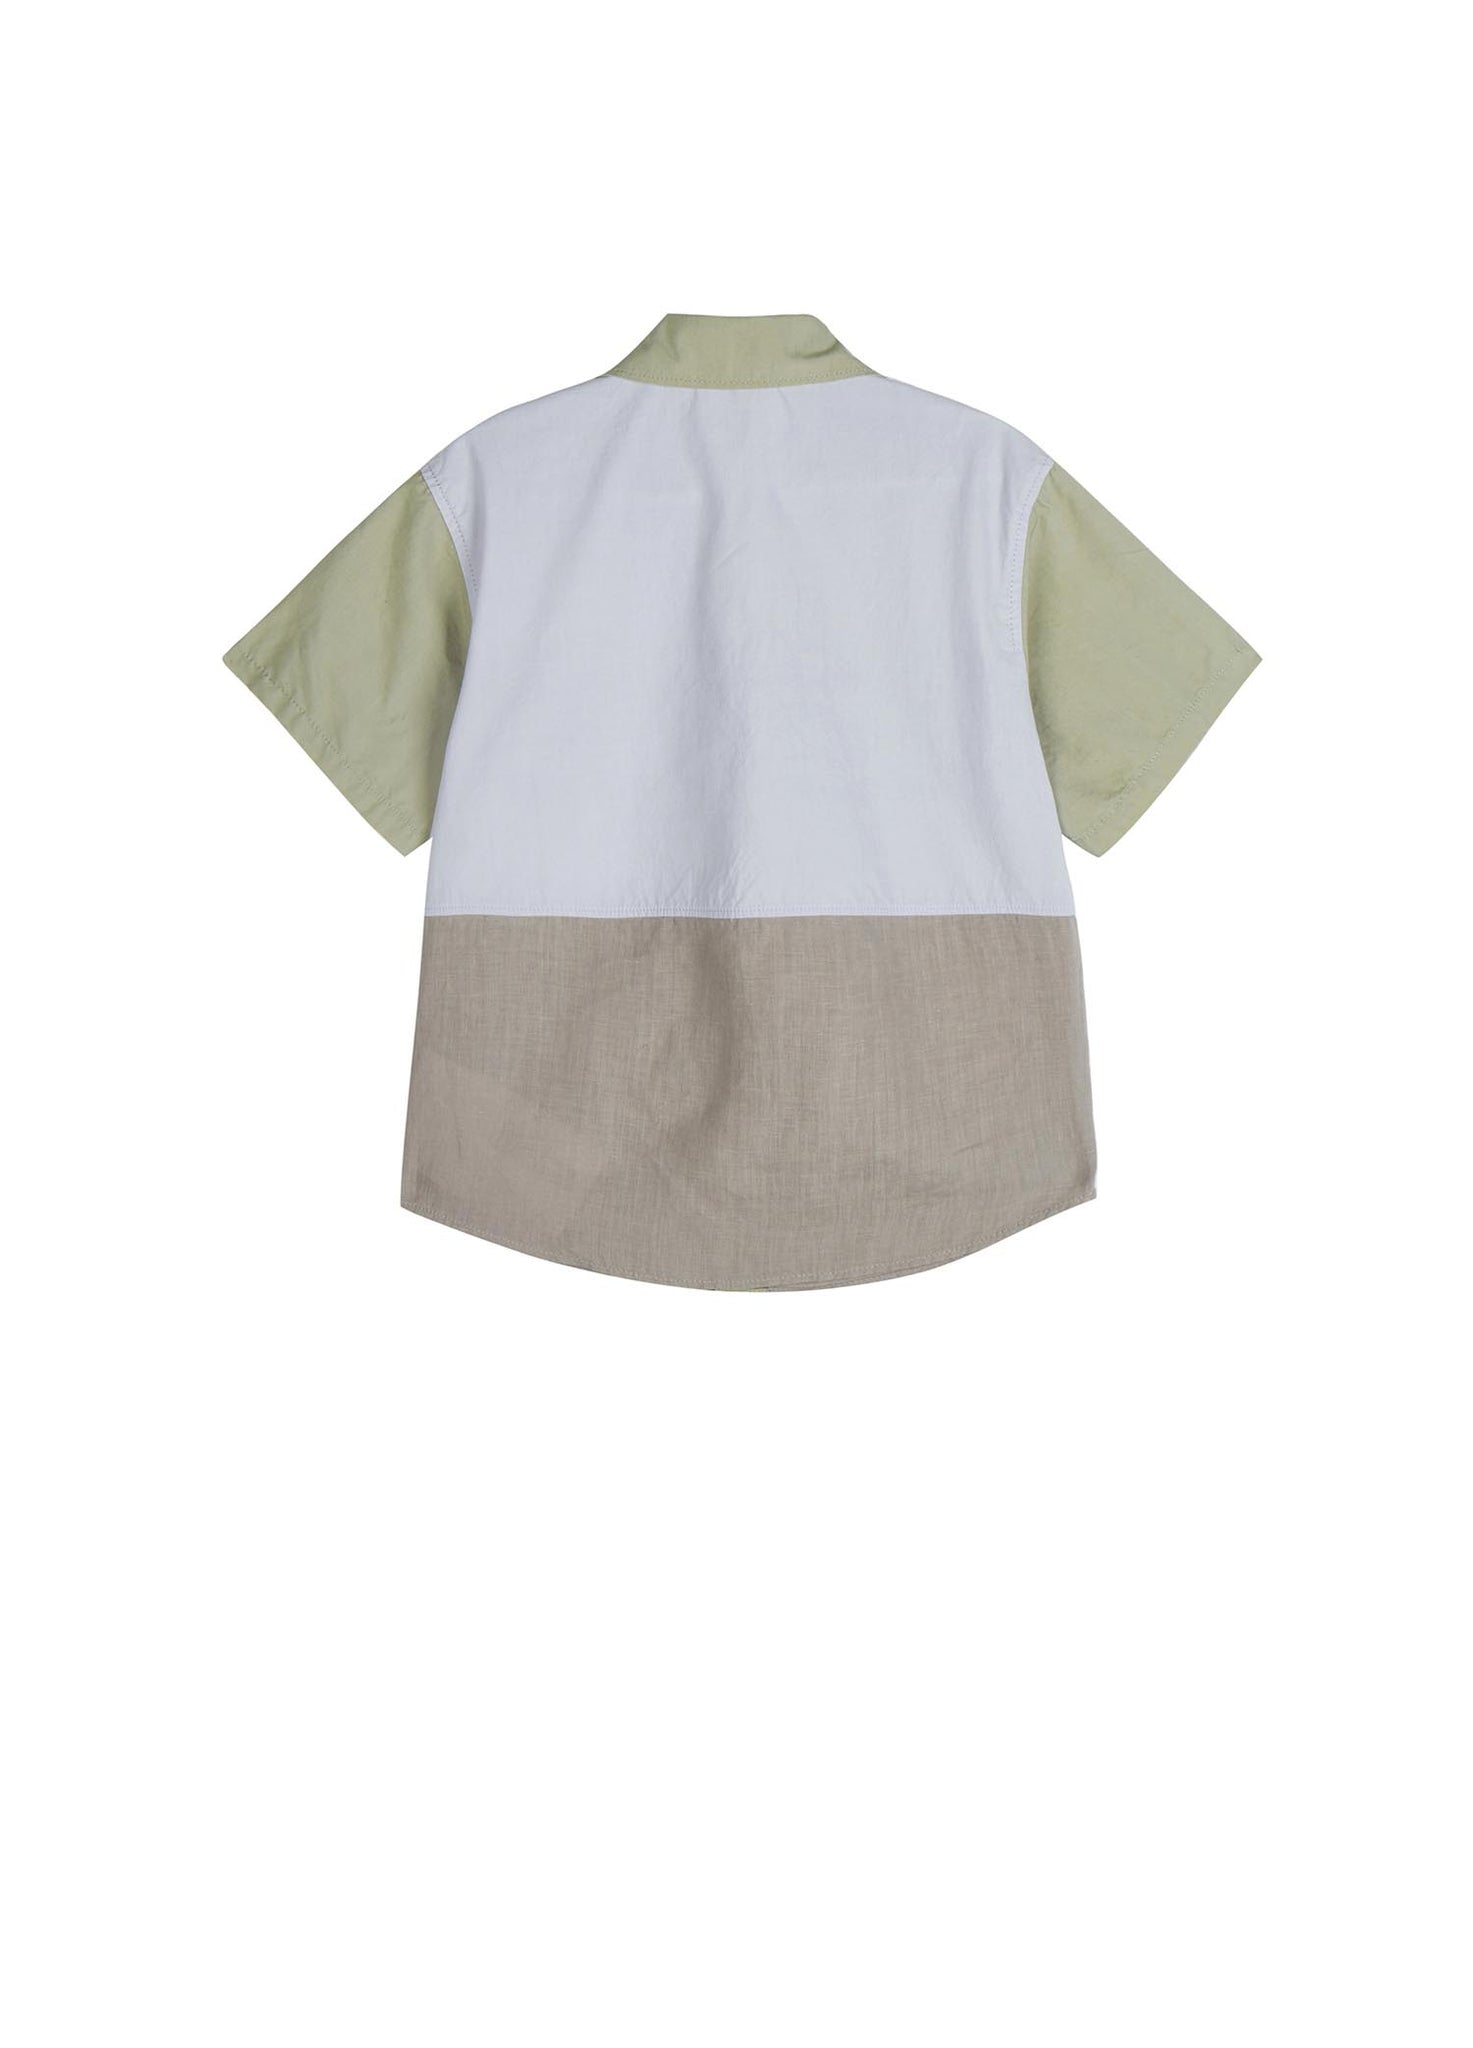 Shirt / jnby by JNBY Multi-Color Patchwork Short Sleeve Shirt